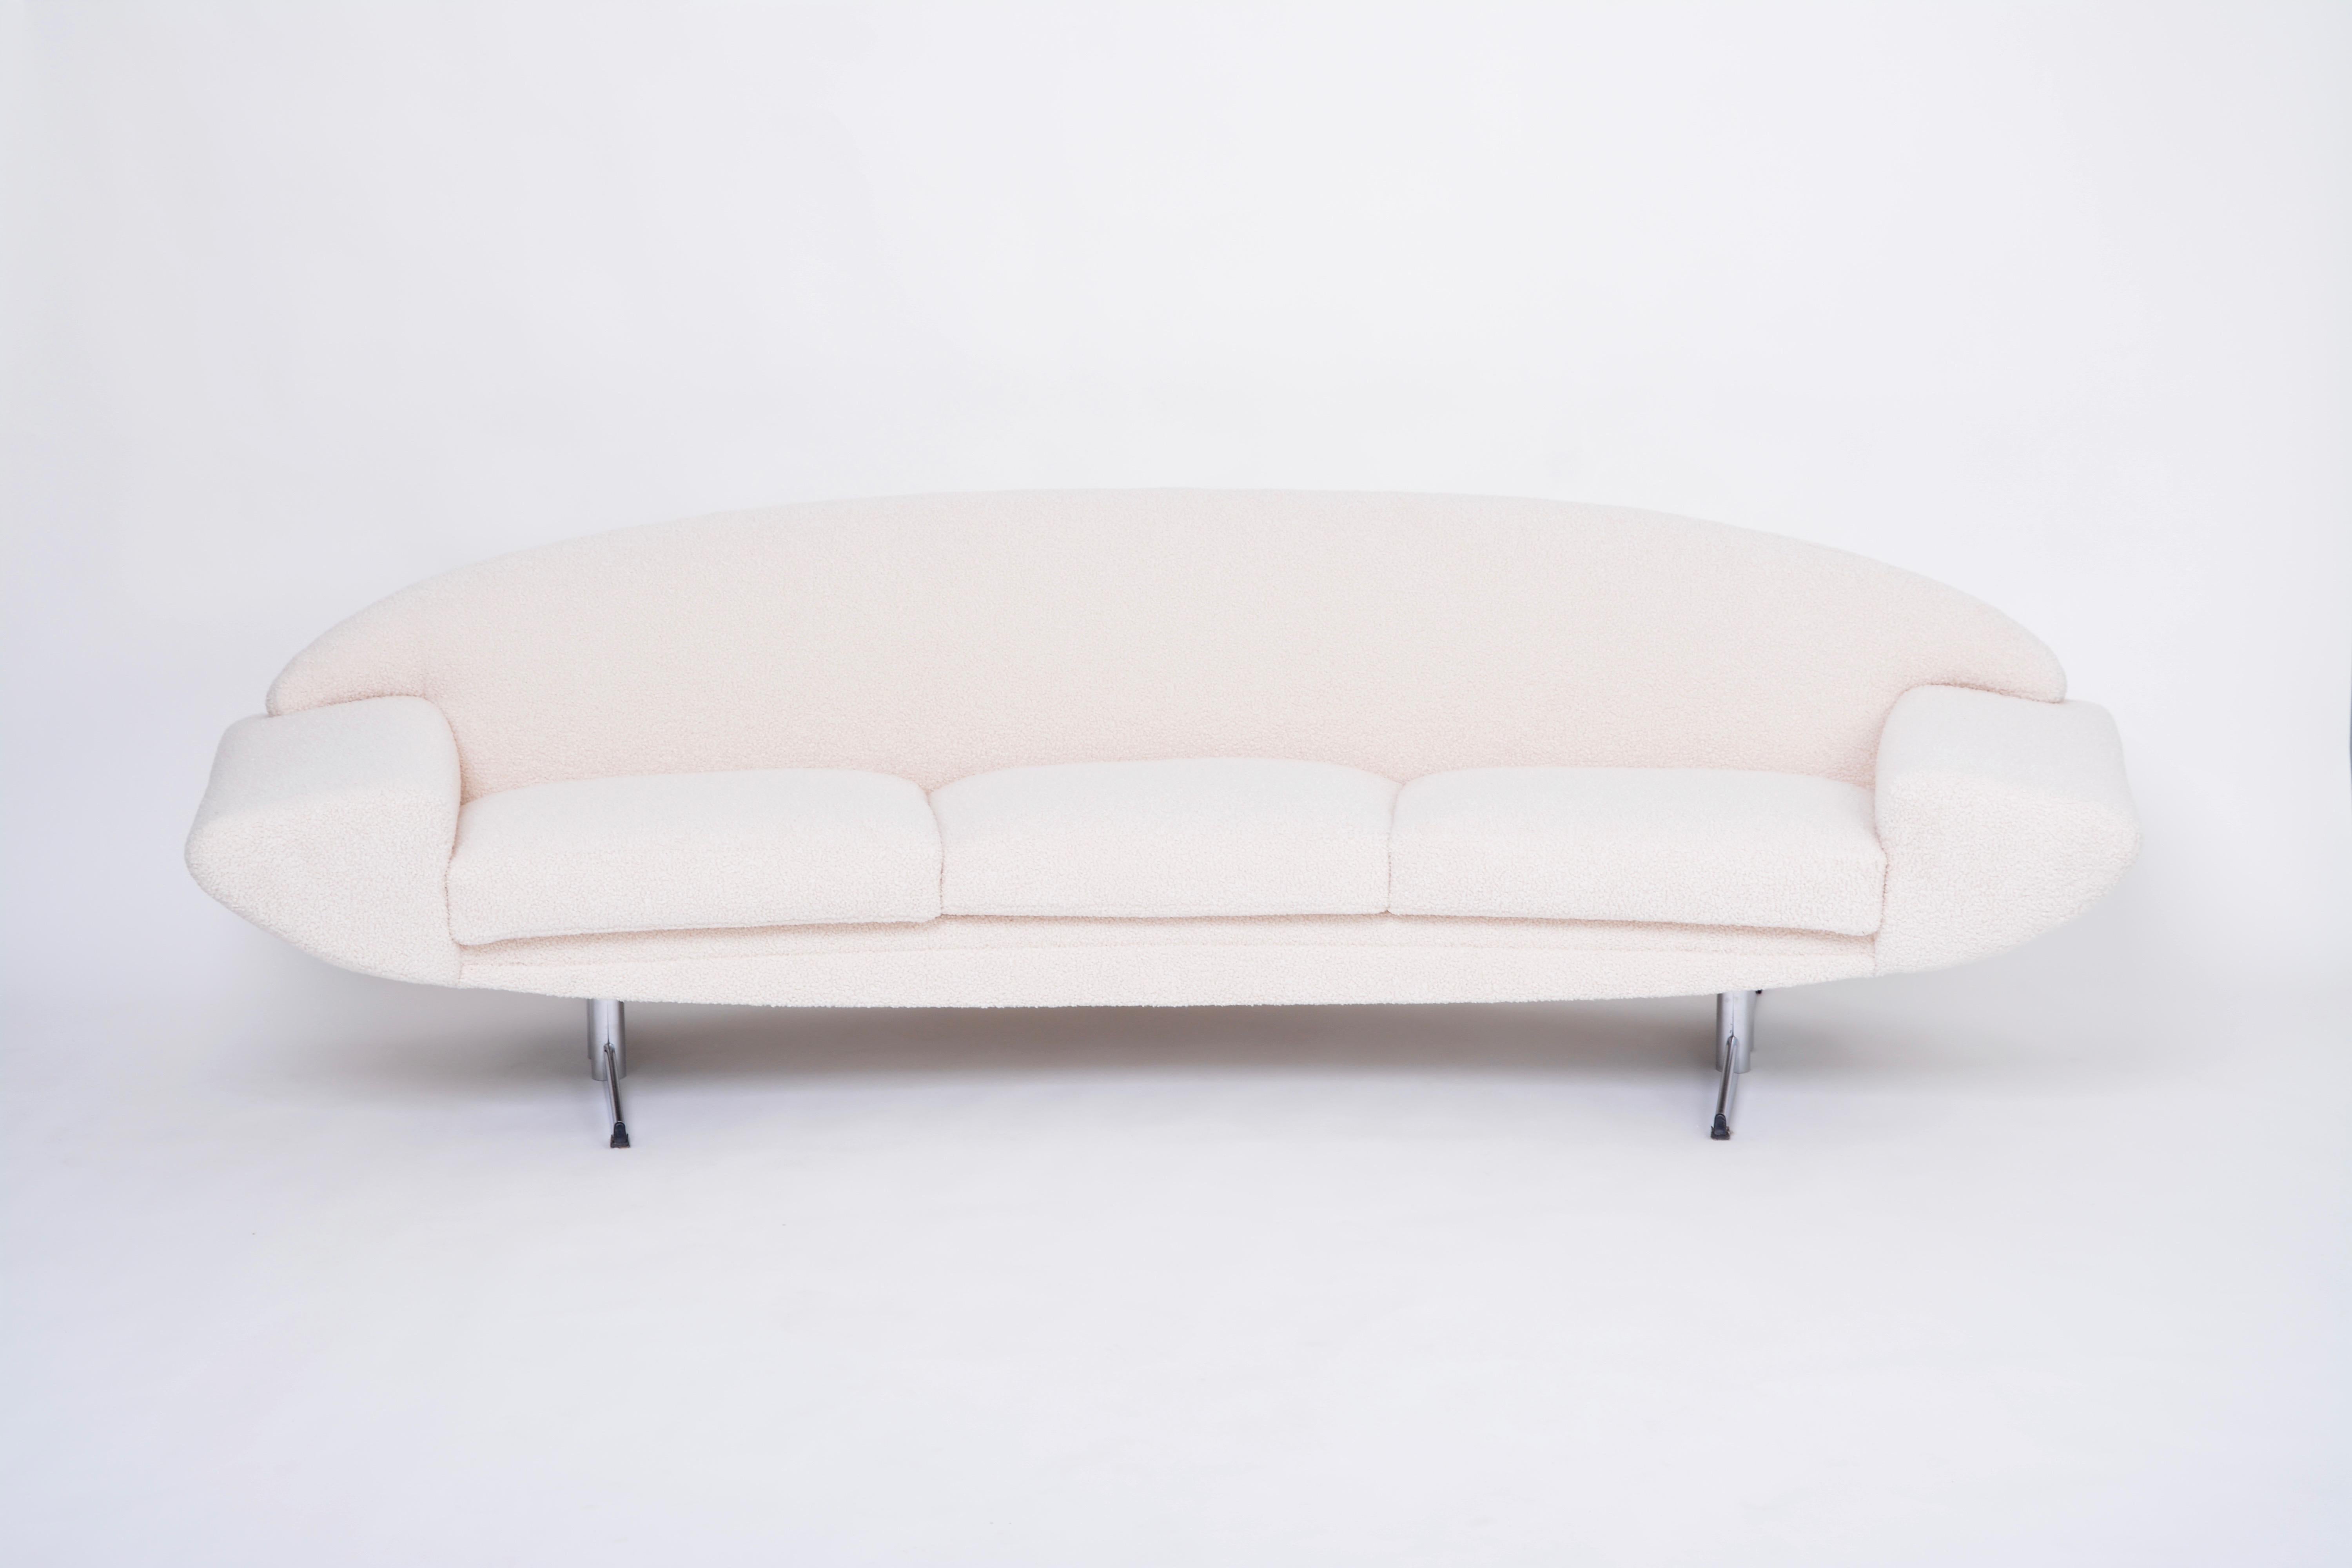 This is an absolute iconic piece of Scandinavian Midcentury Modern design. Johannes Andersen designed the Capri series consisting of a sofa, armchairs and a coffee table all produced by Swedish company Trensum. 
The sofa is is especially beautiful